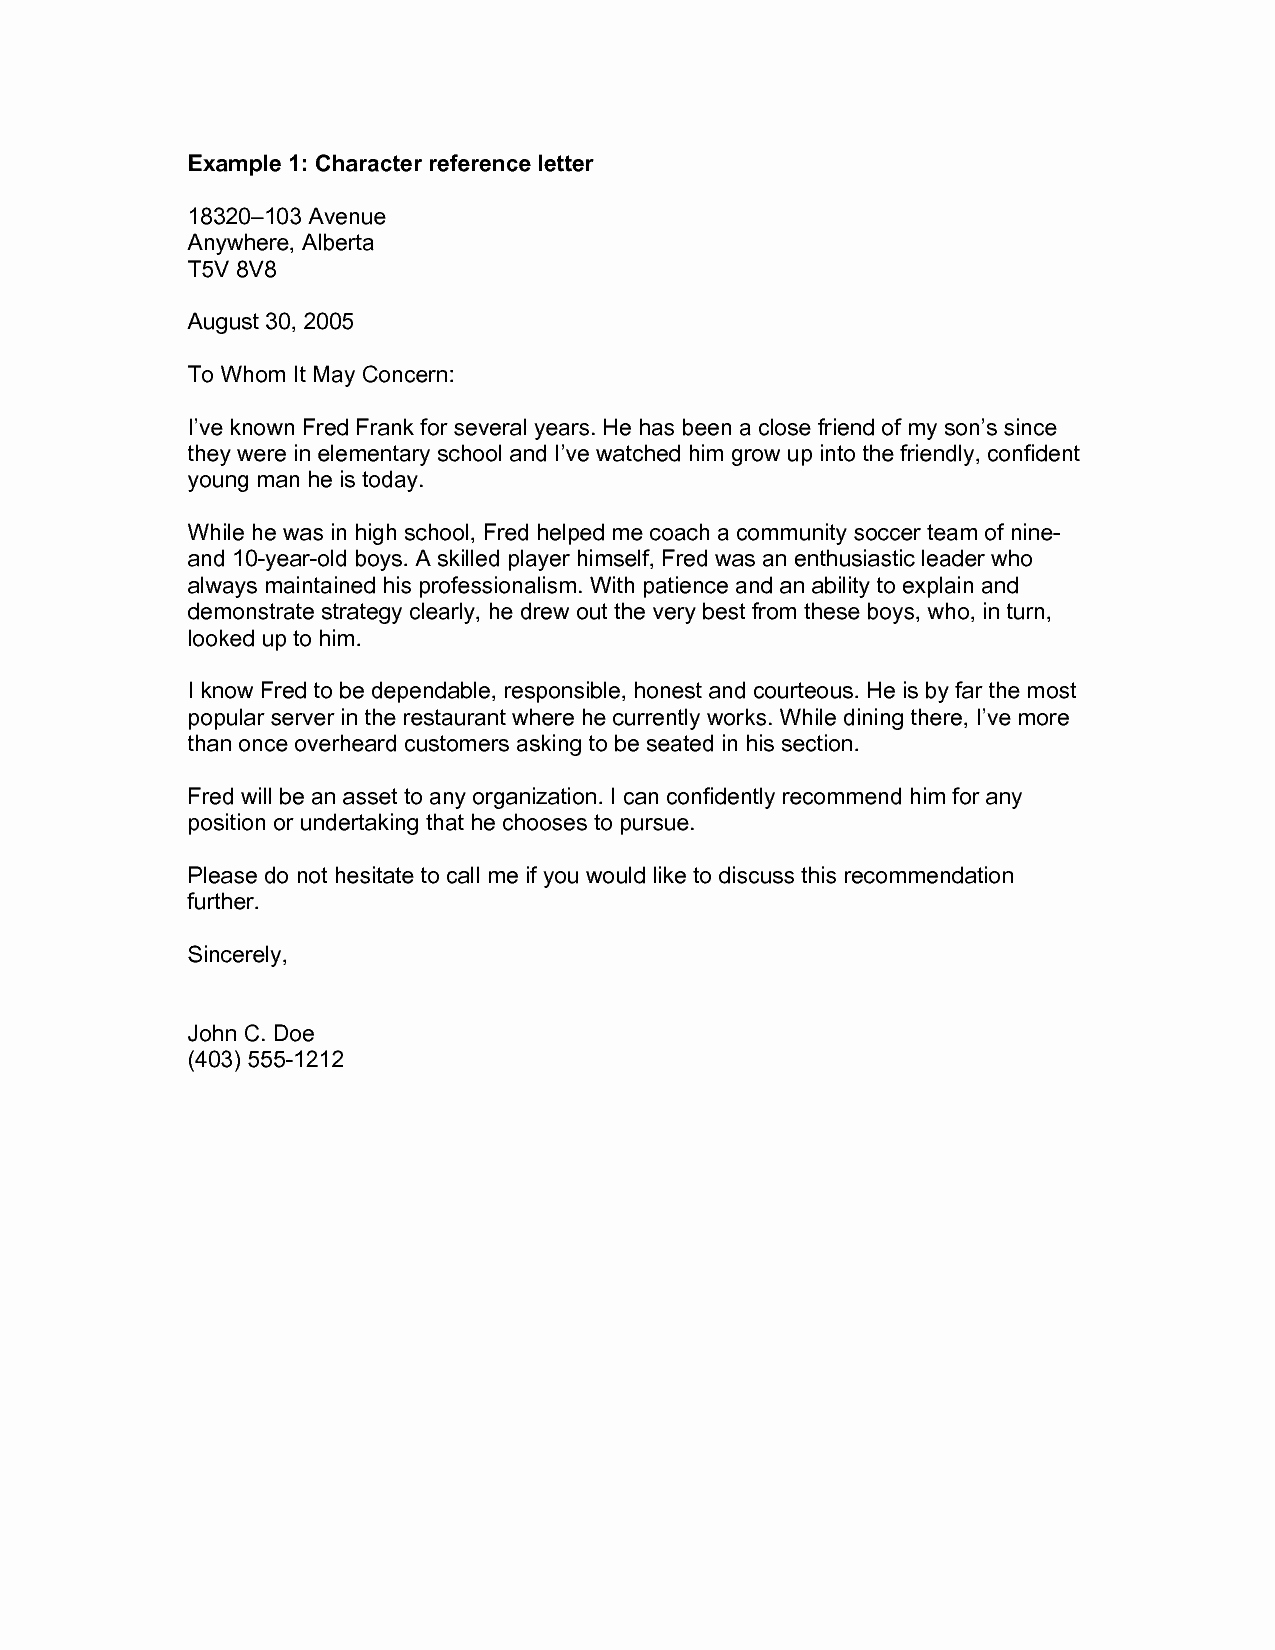 Letter Of Reccomendation Template Luxury Re Mendation Letter for A Friend Template